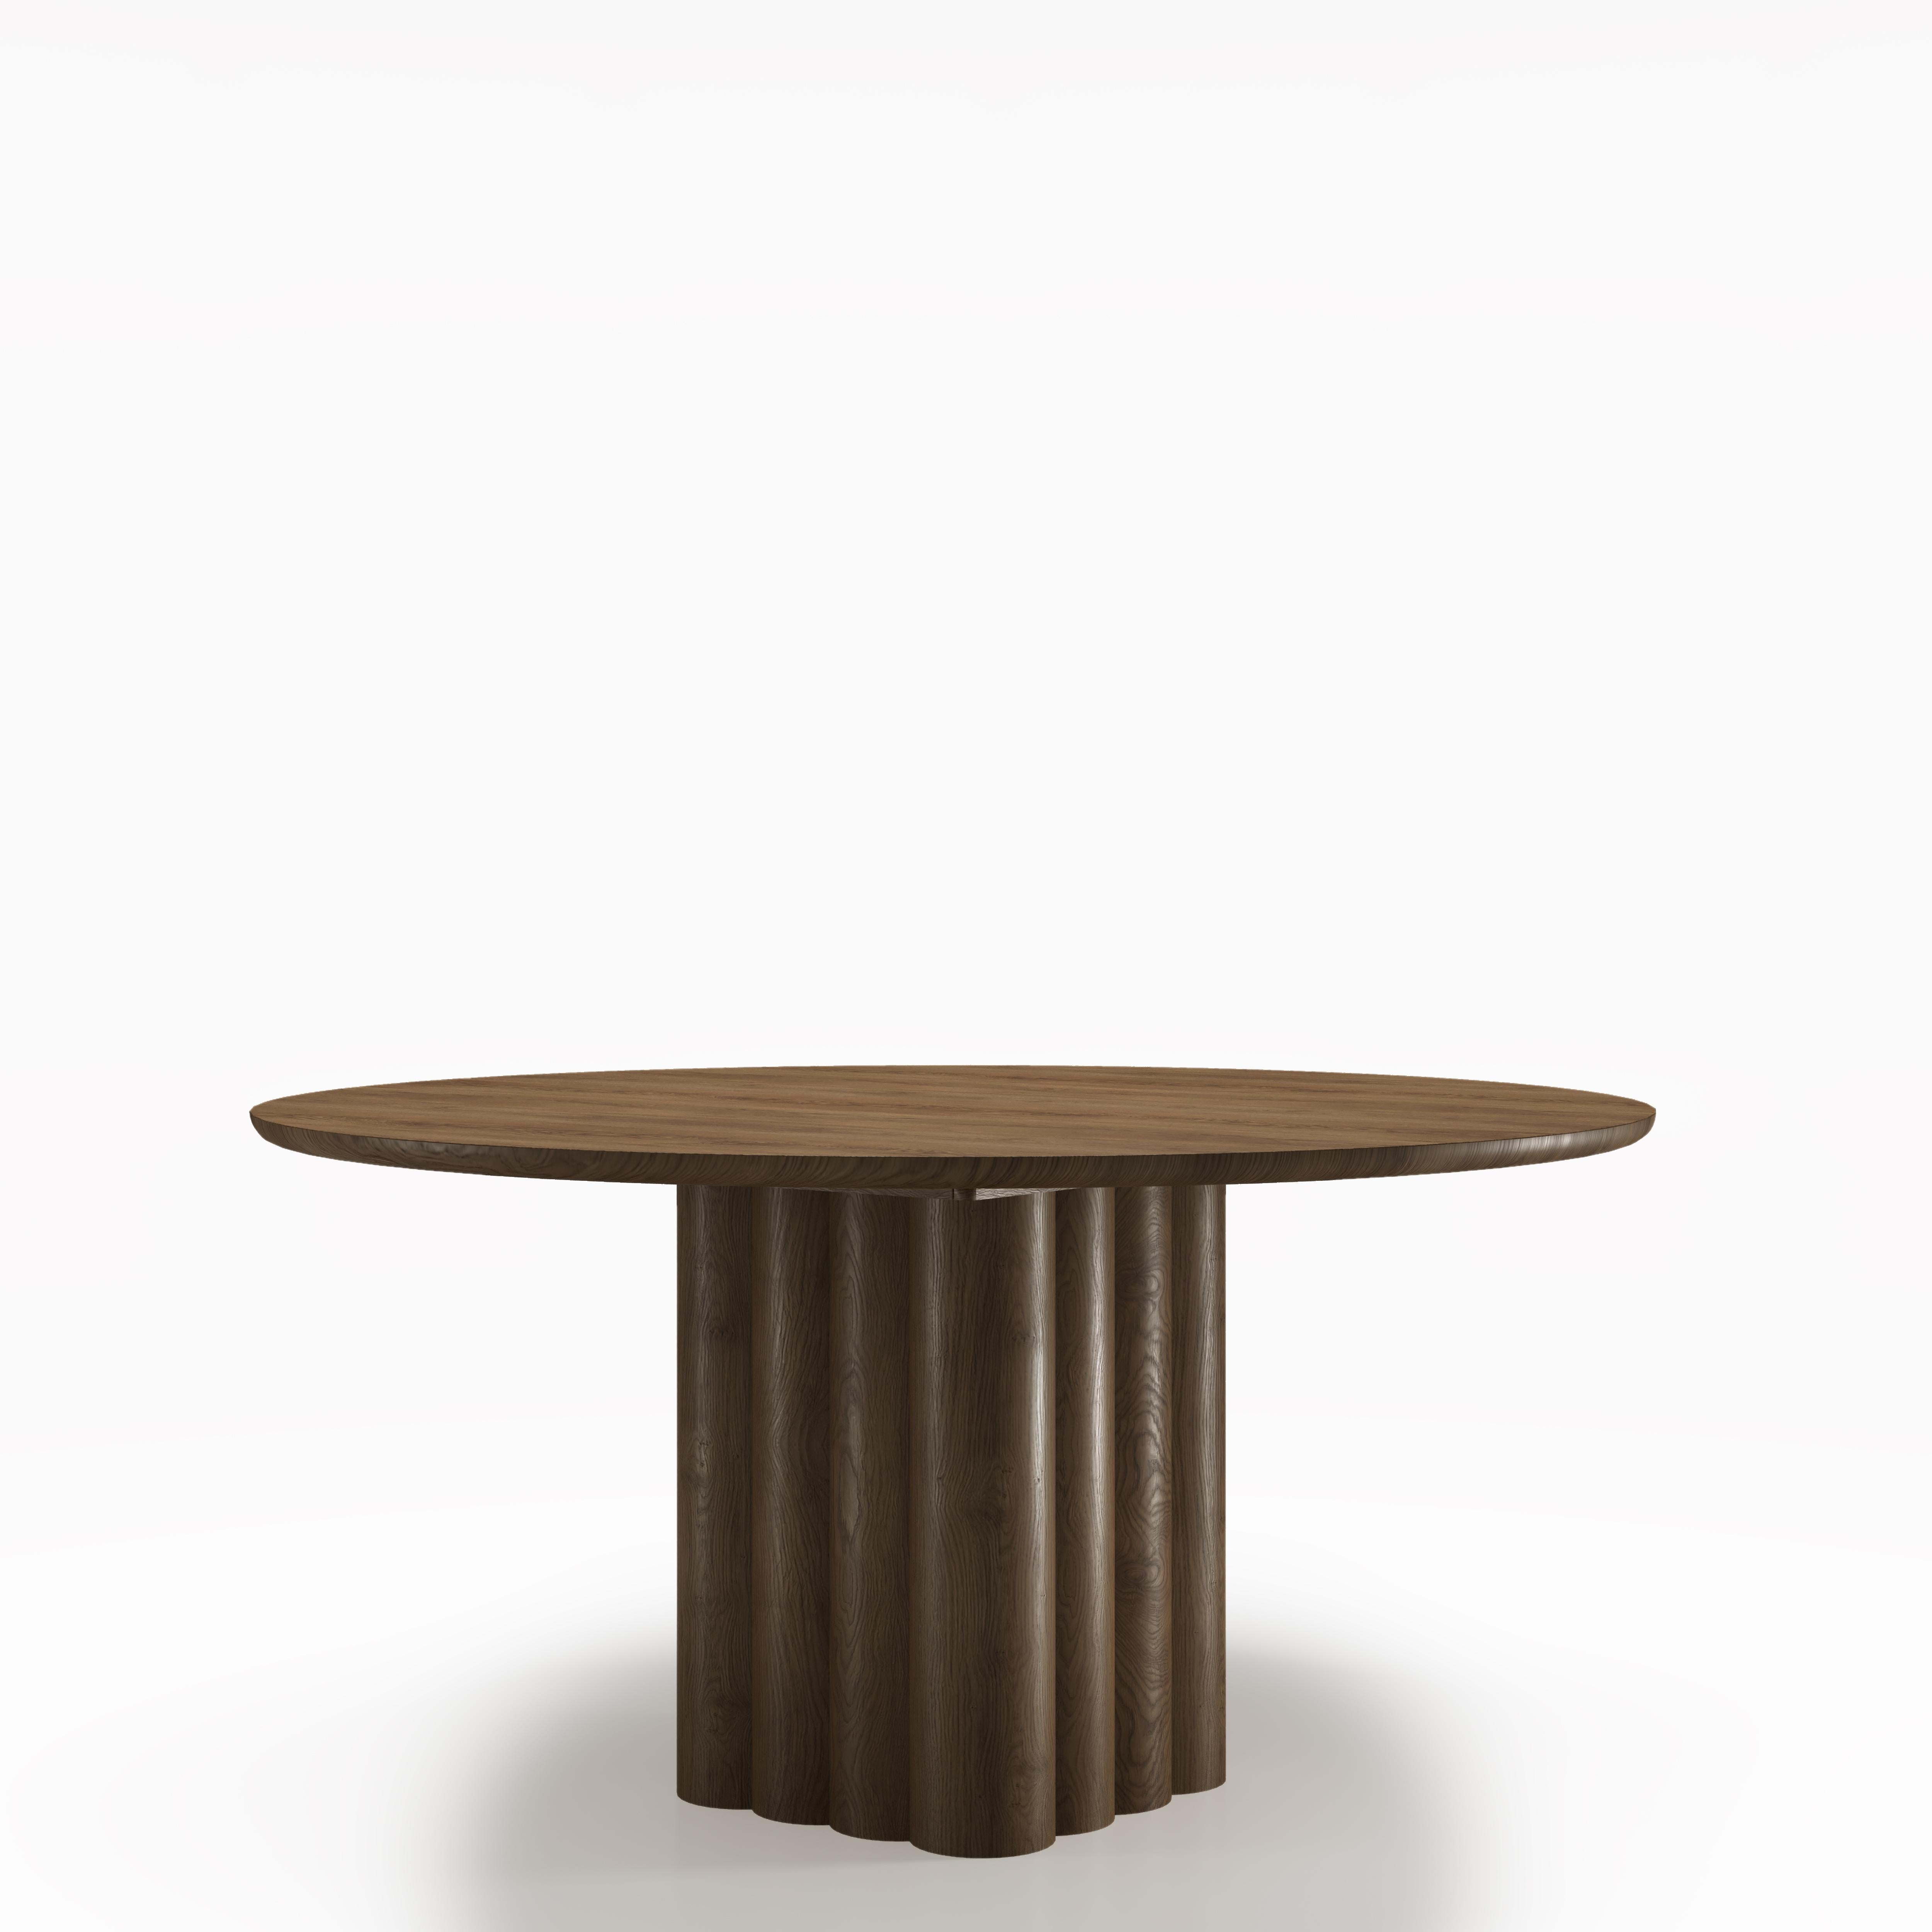 Danish Round Dining Table 'Plush' by Dk3, Smoked Oak or Walnut, 140 cm For Sale